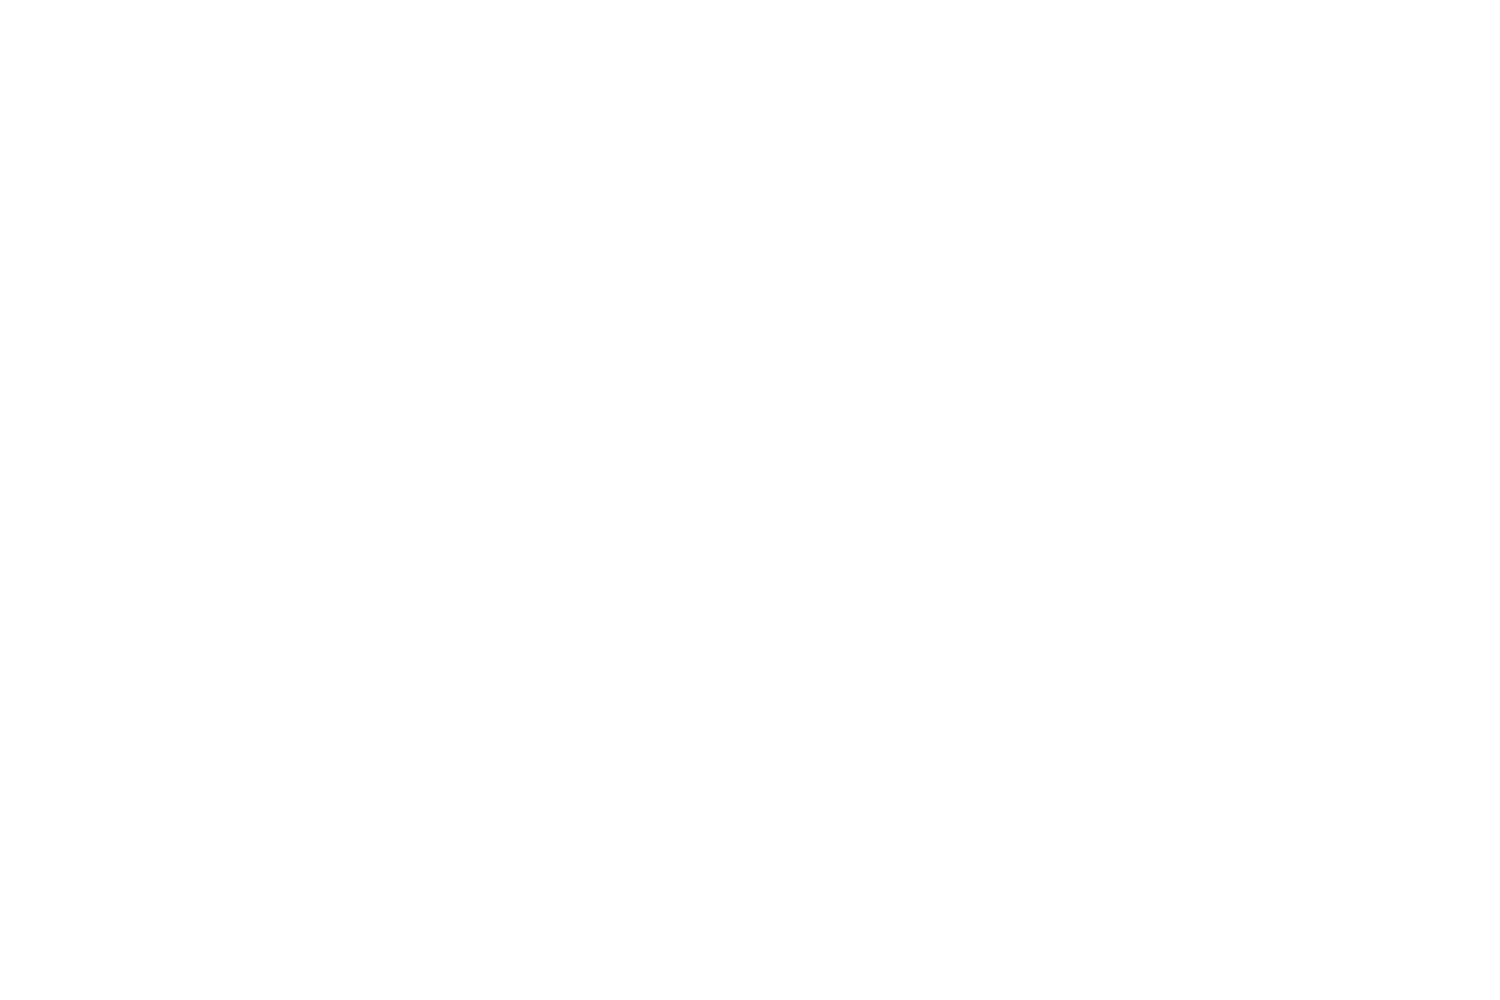 Unlimited Images Photography